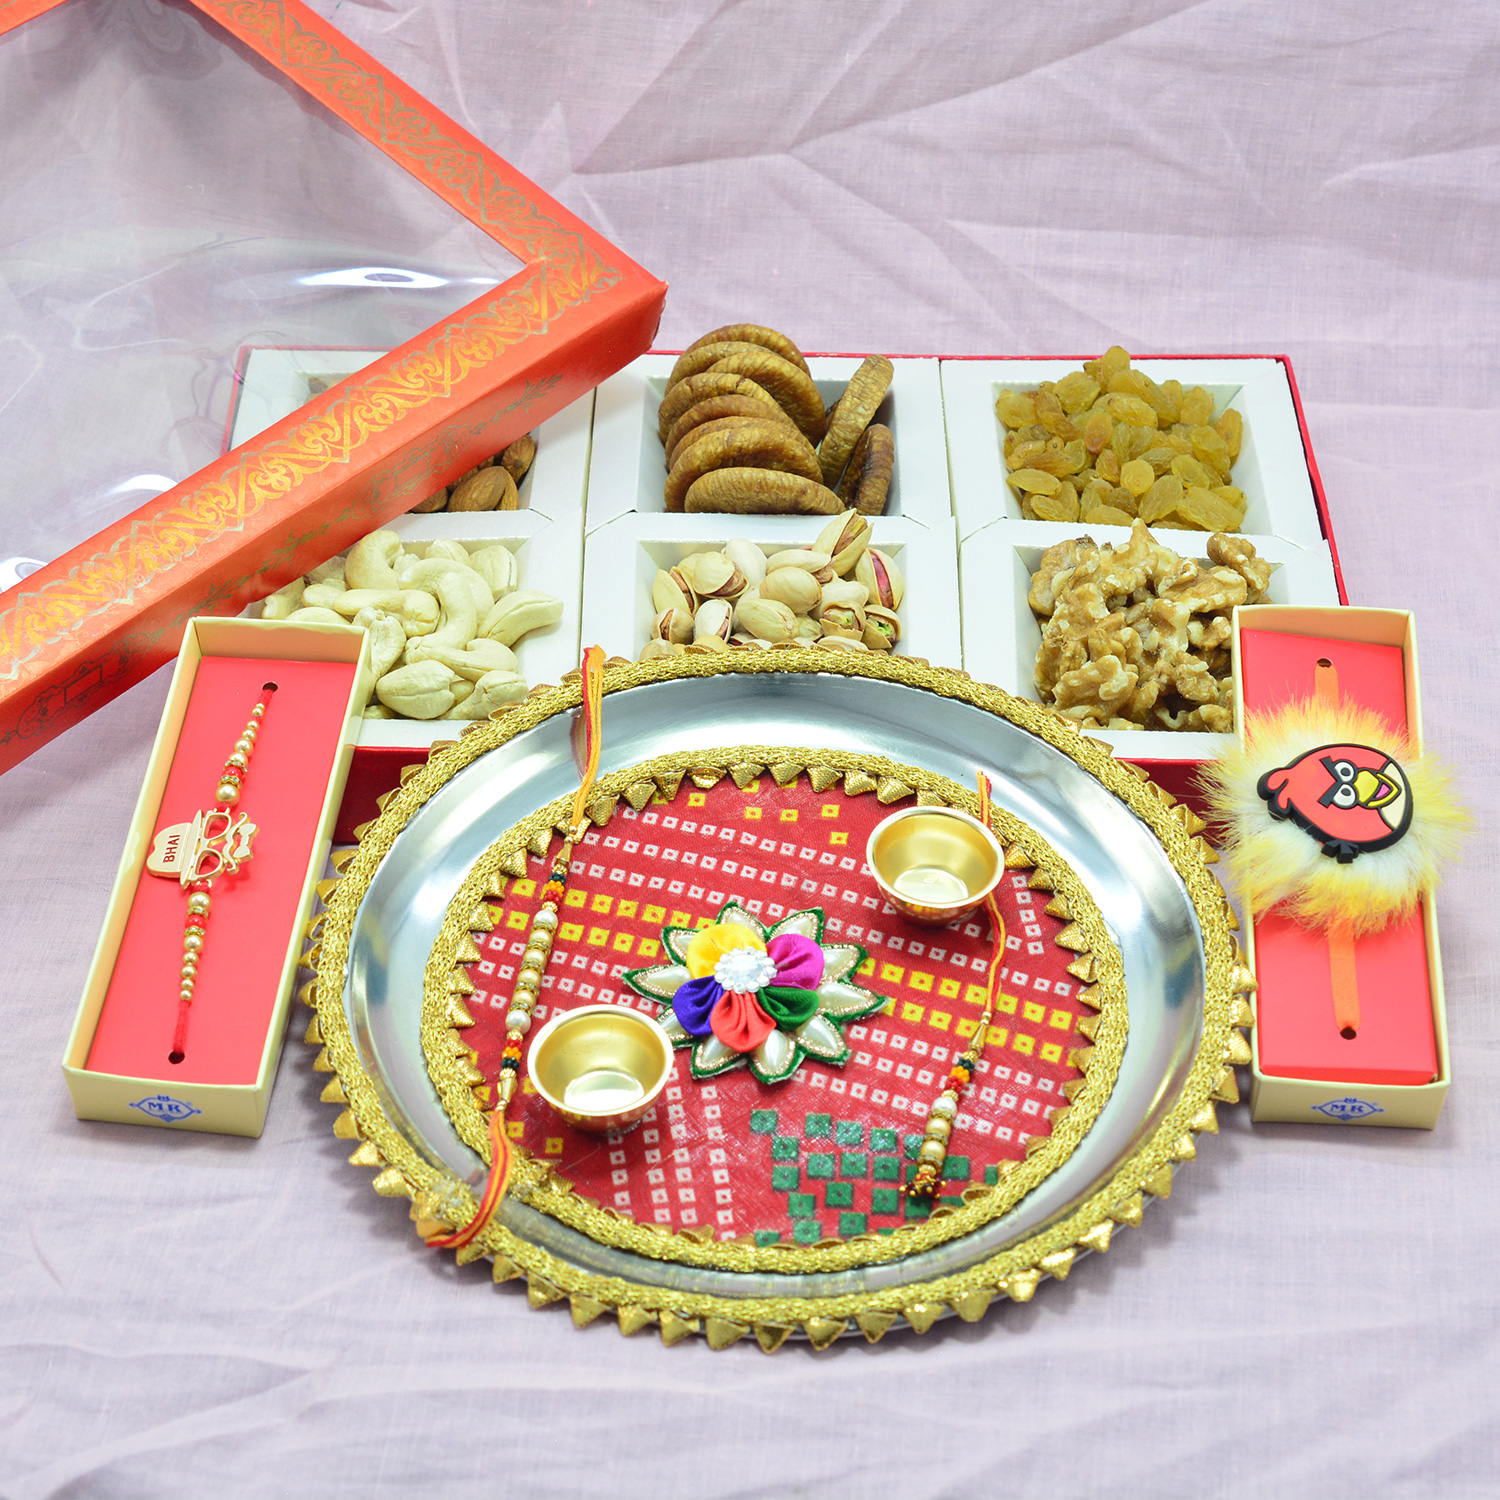 6 Types of Dry Fruits with Special Rakhis and Colorful Attractive Looking Rakhi Pooja Thali